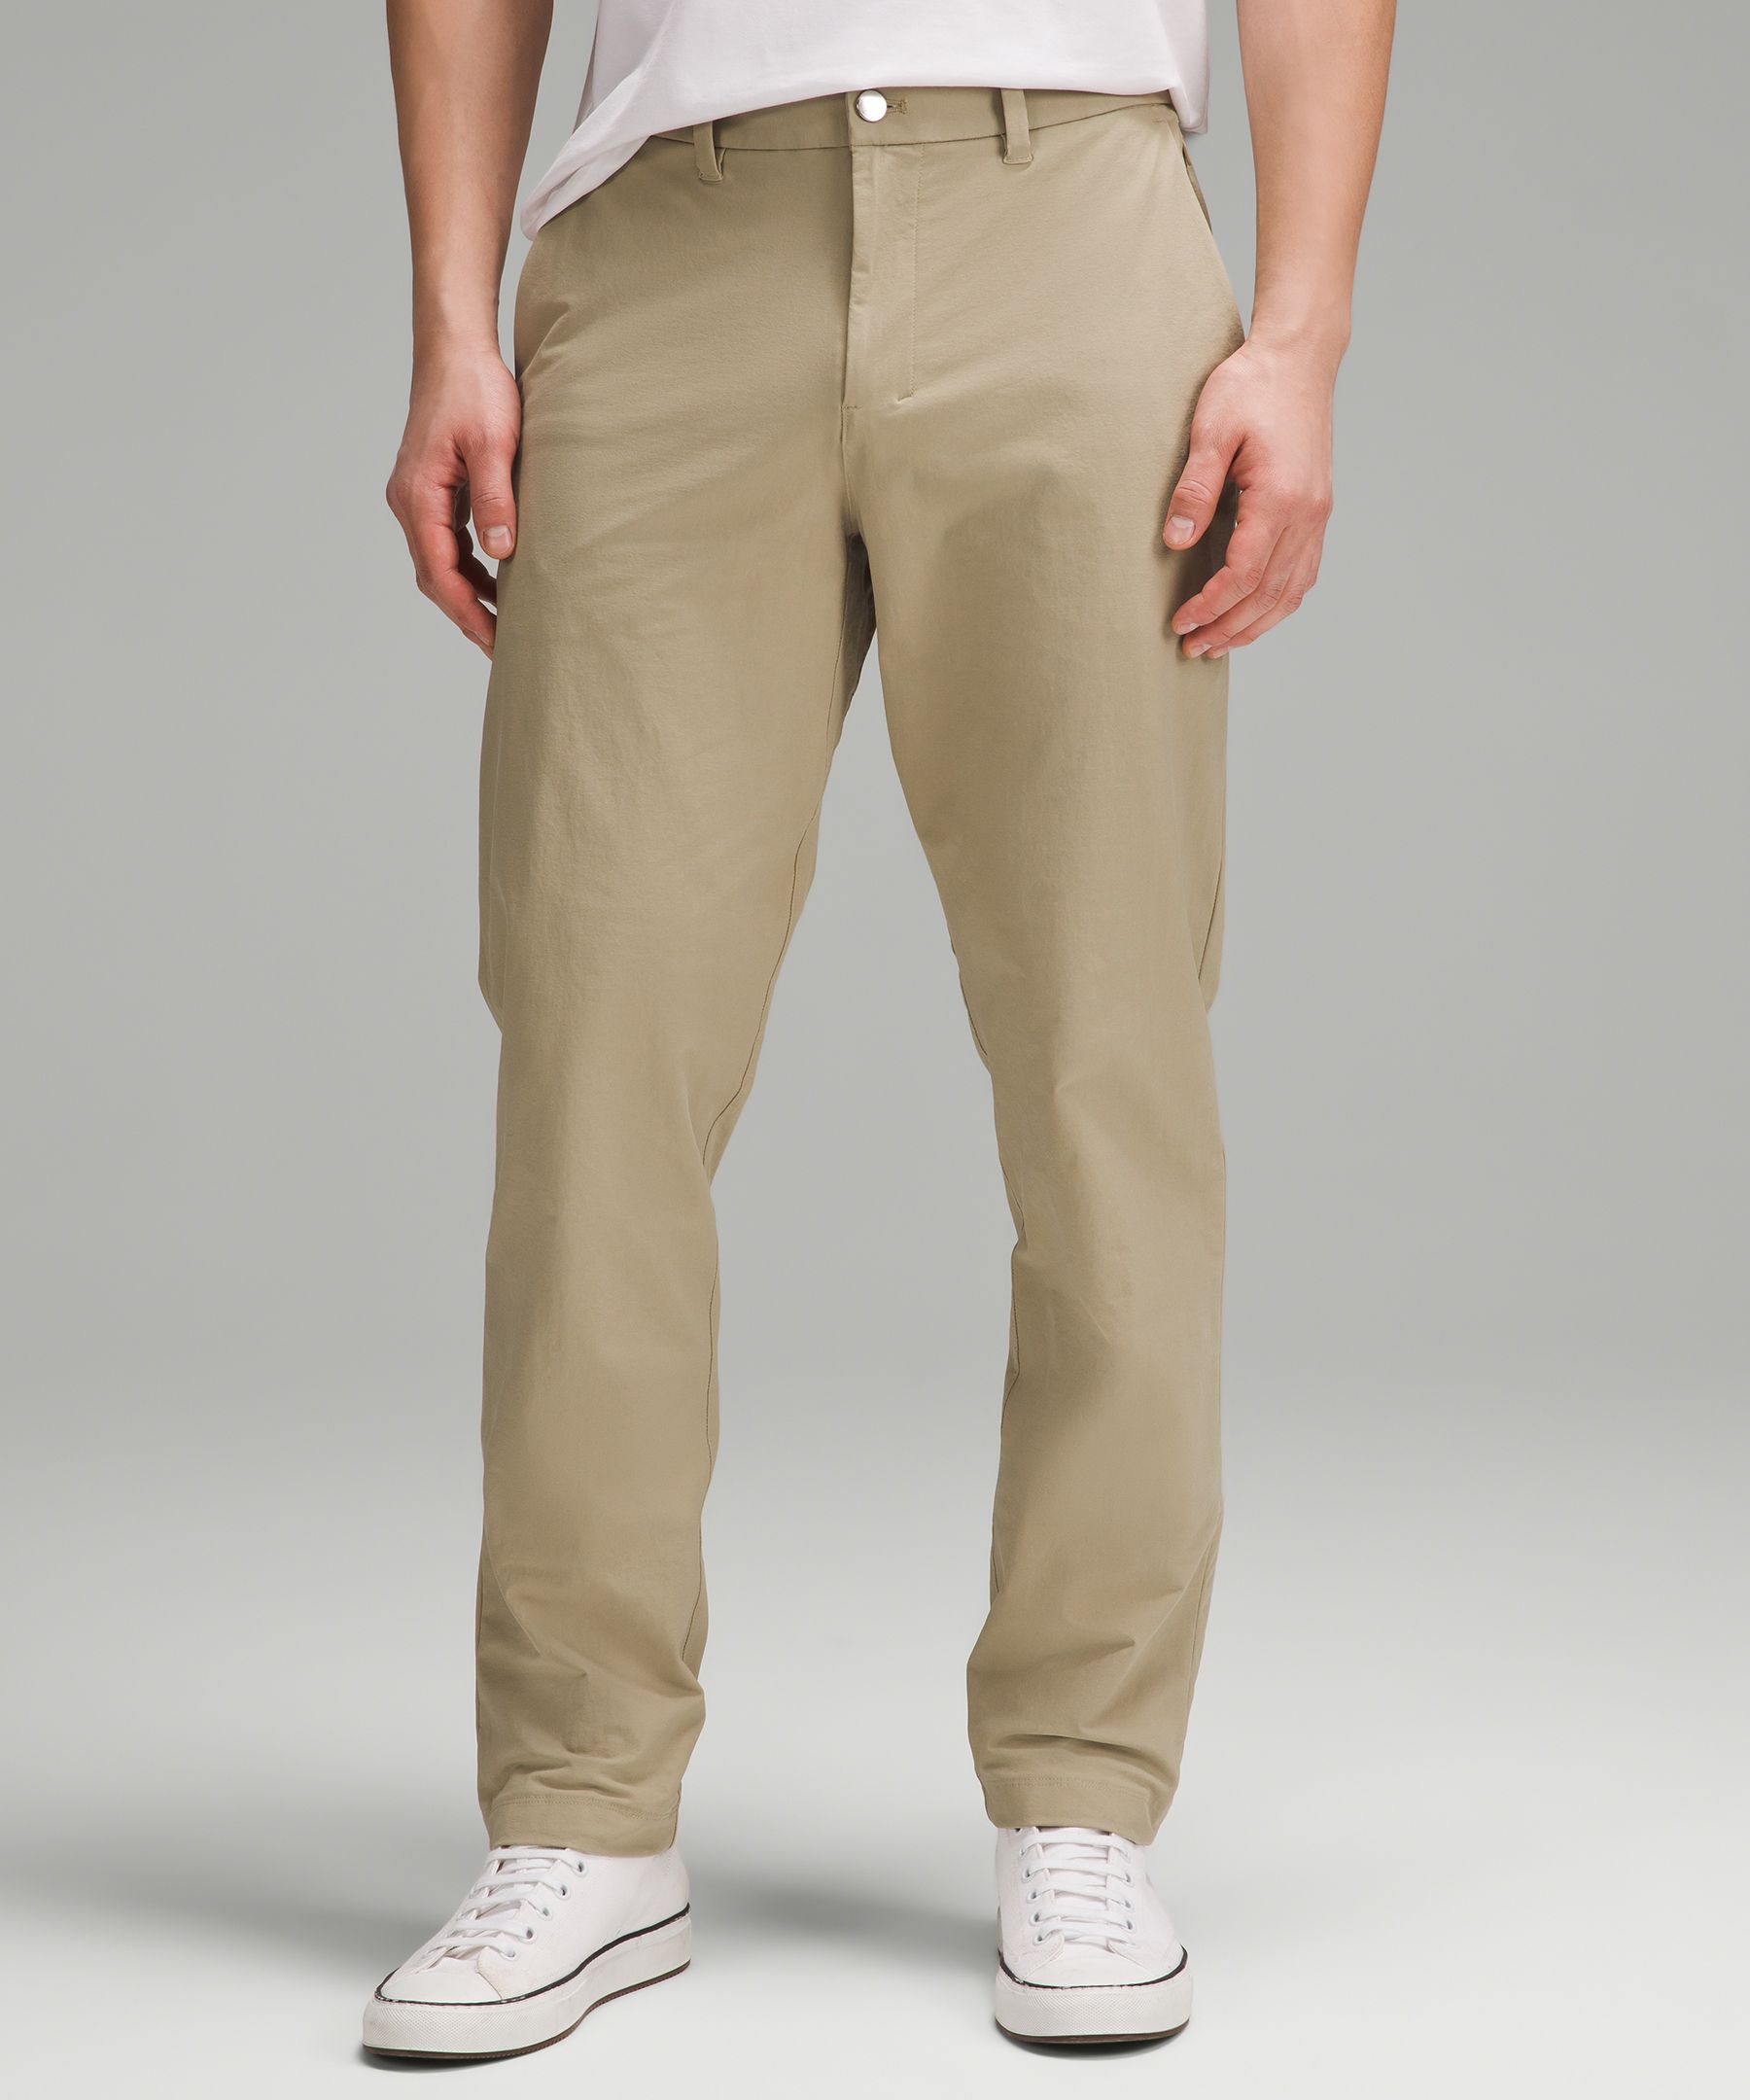 lululemon athletica Check Casual Pants for Men